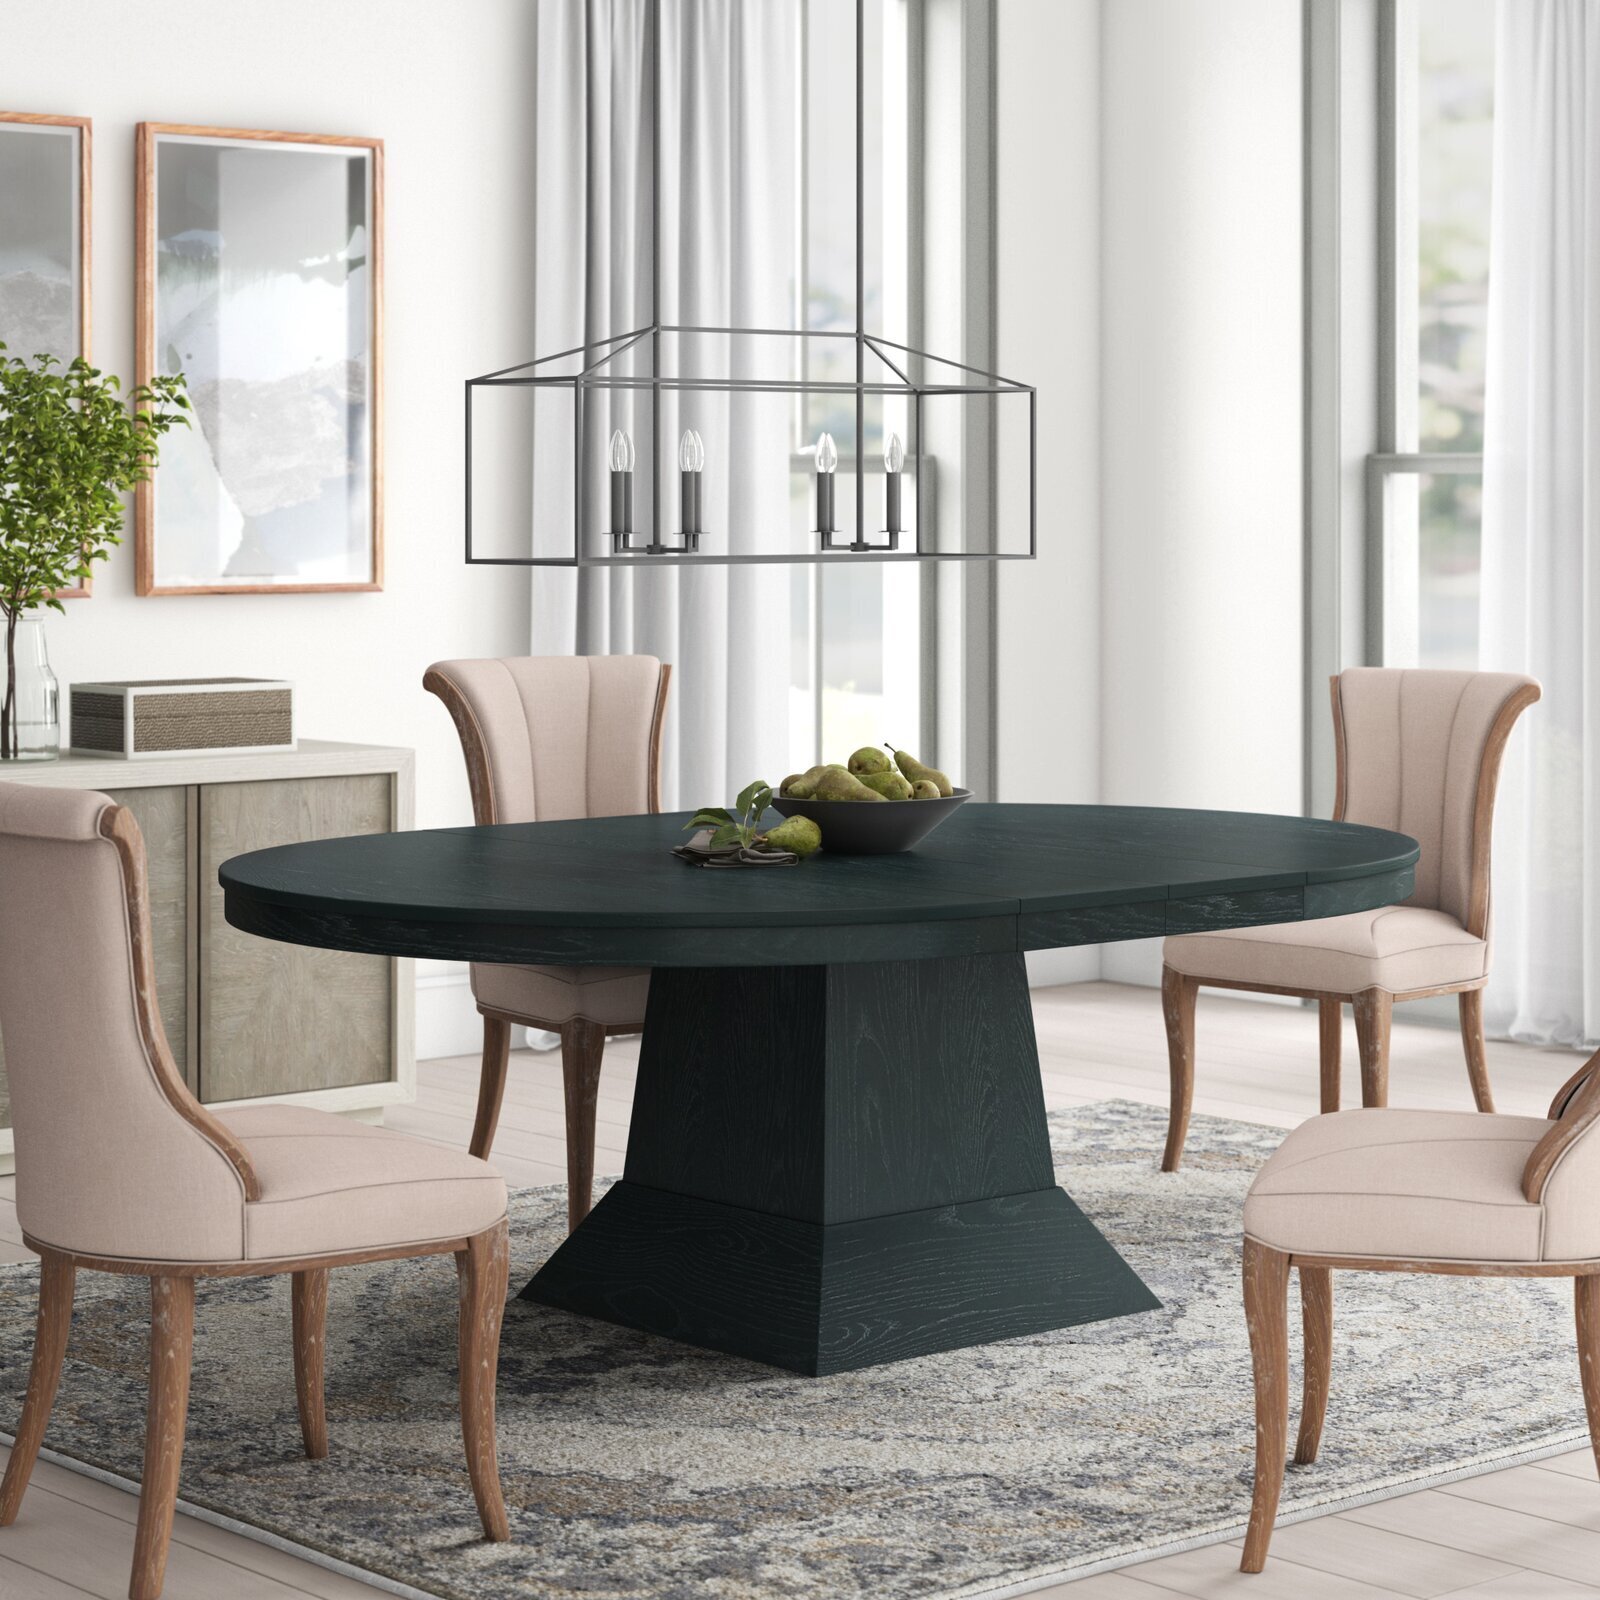 Black Round Extendable Dining Table Seats